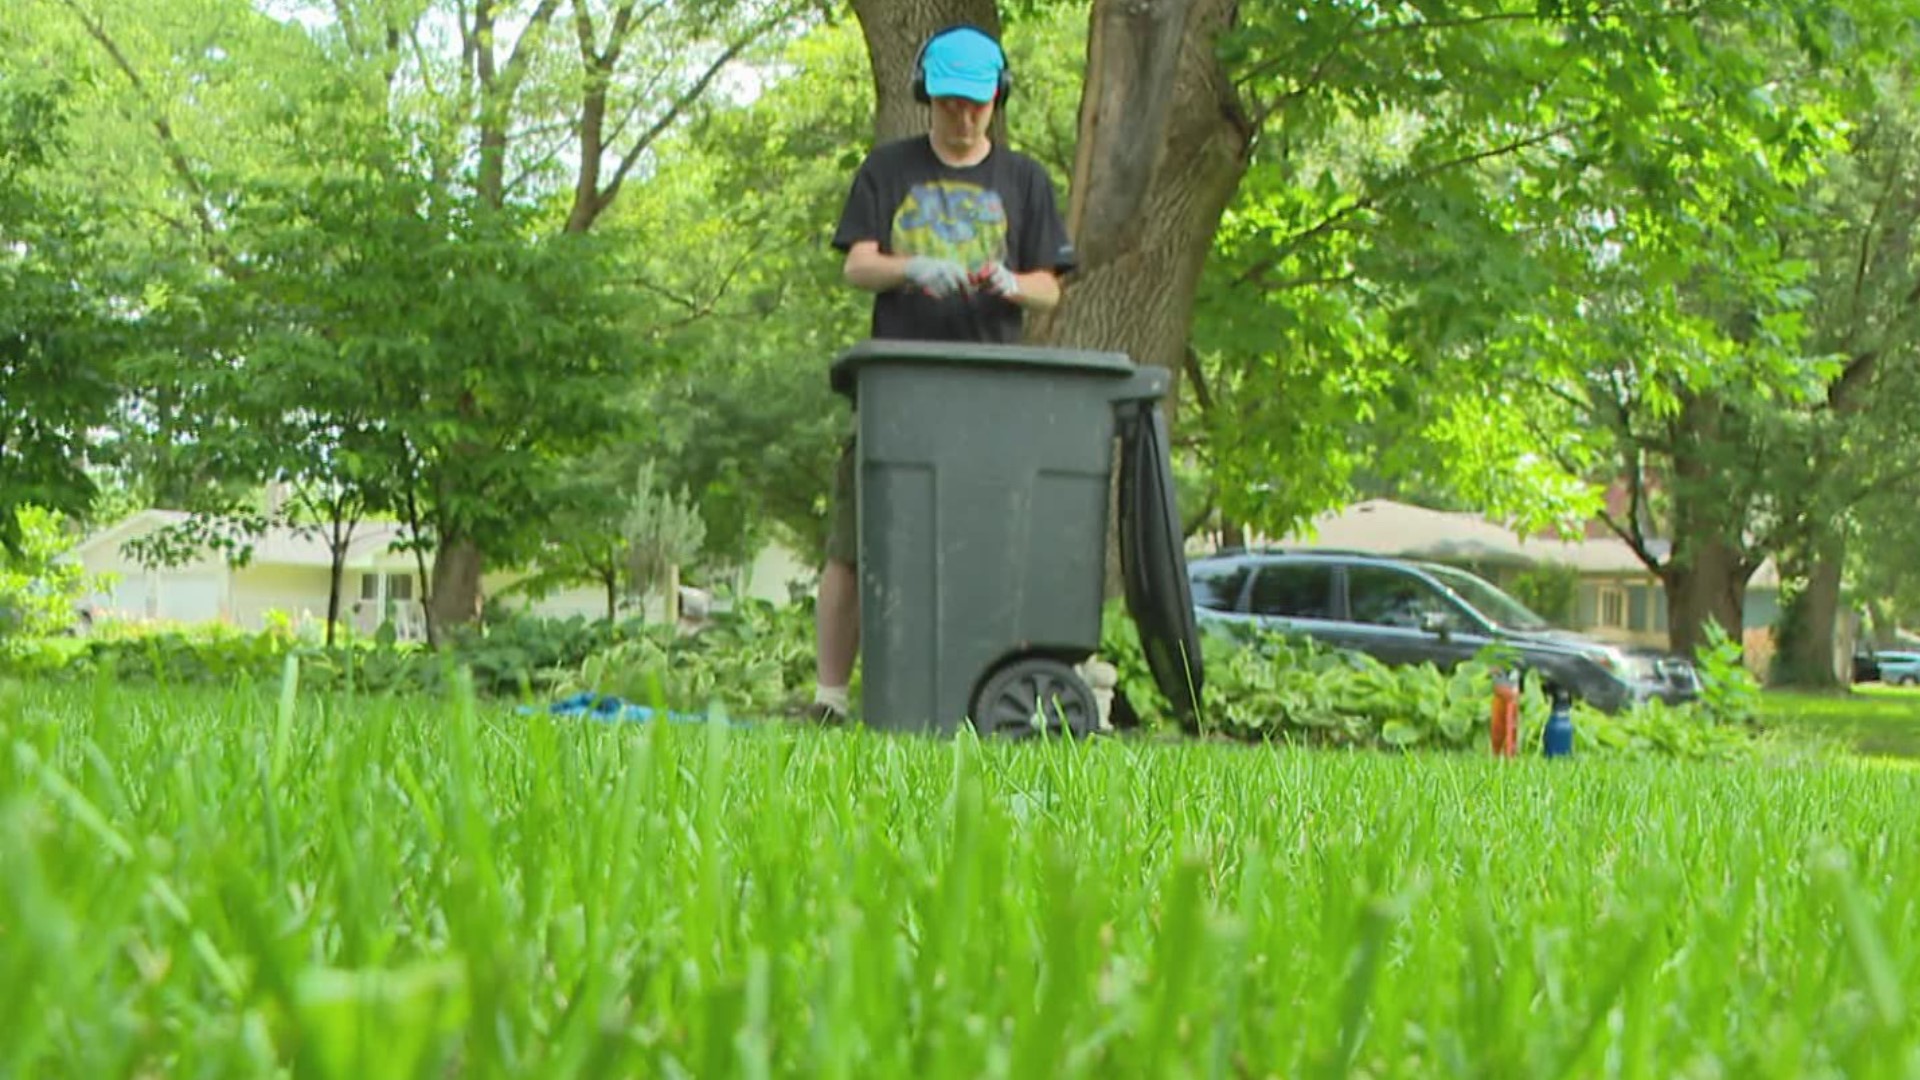 A young man's expertise in lawn care is connecting him with his neighbors.